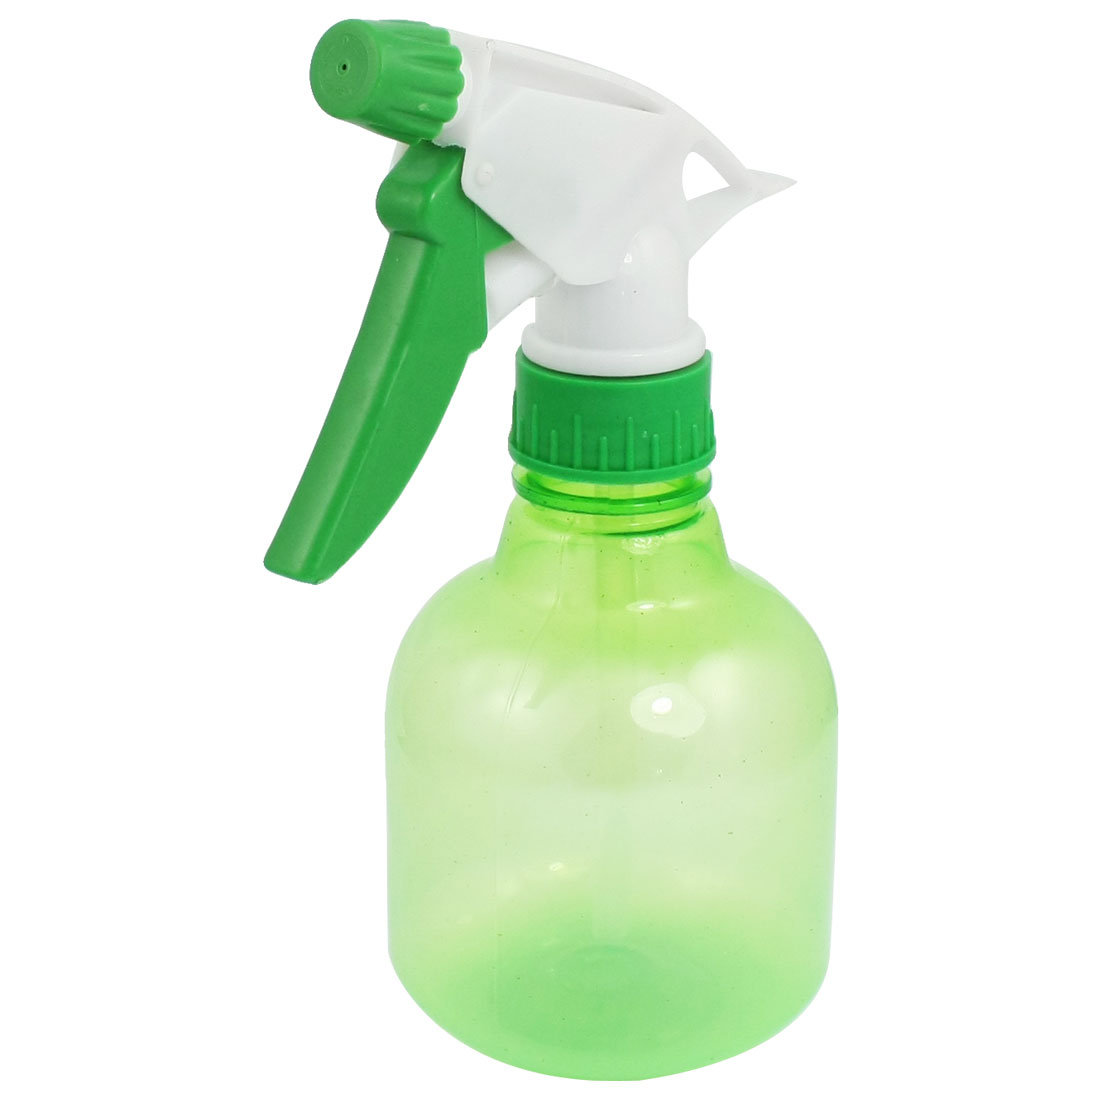 Quality Spray Bottle for all Your Traveling Needs